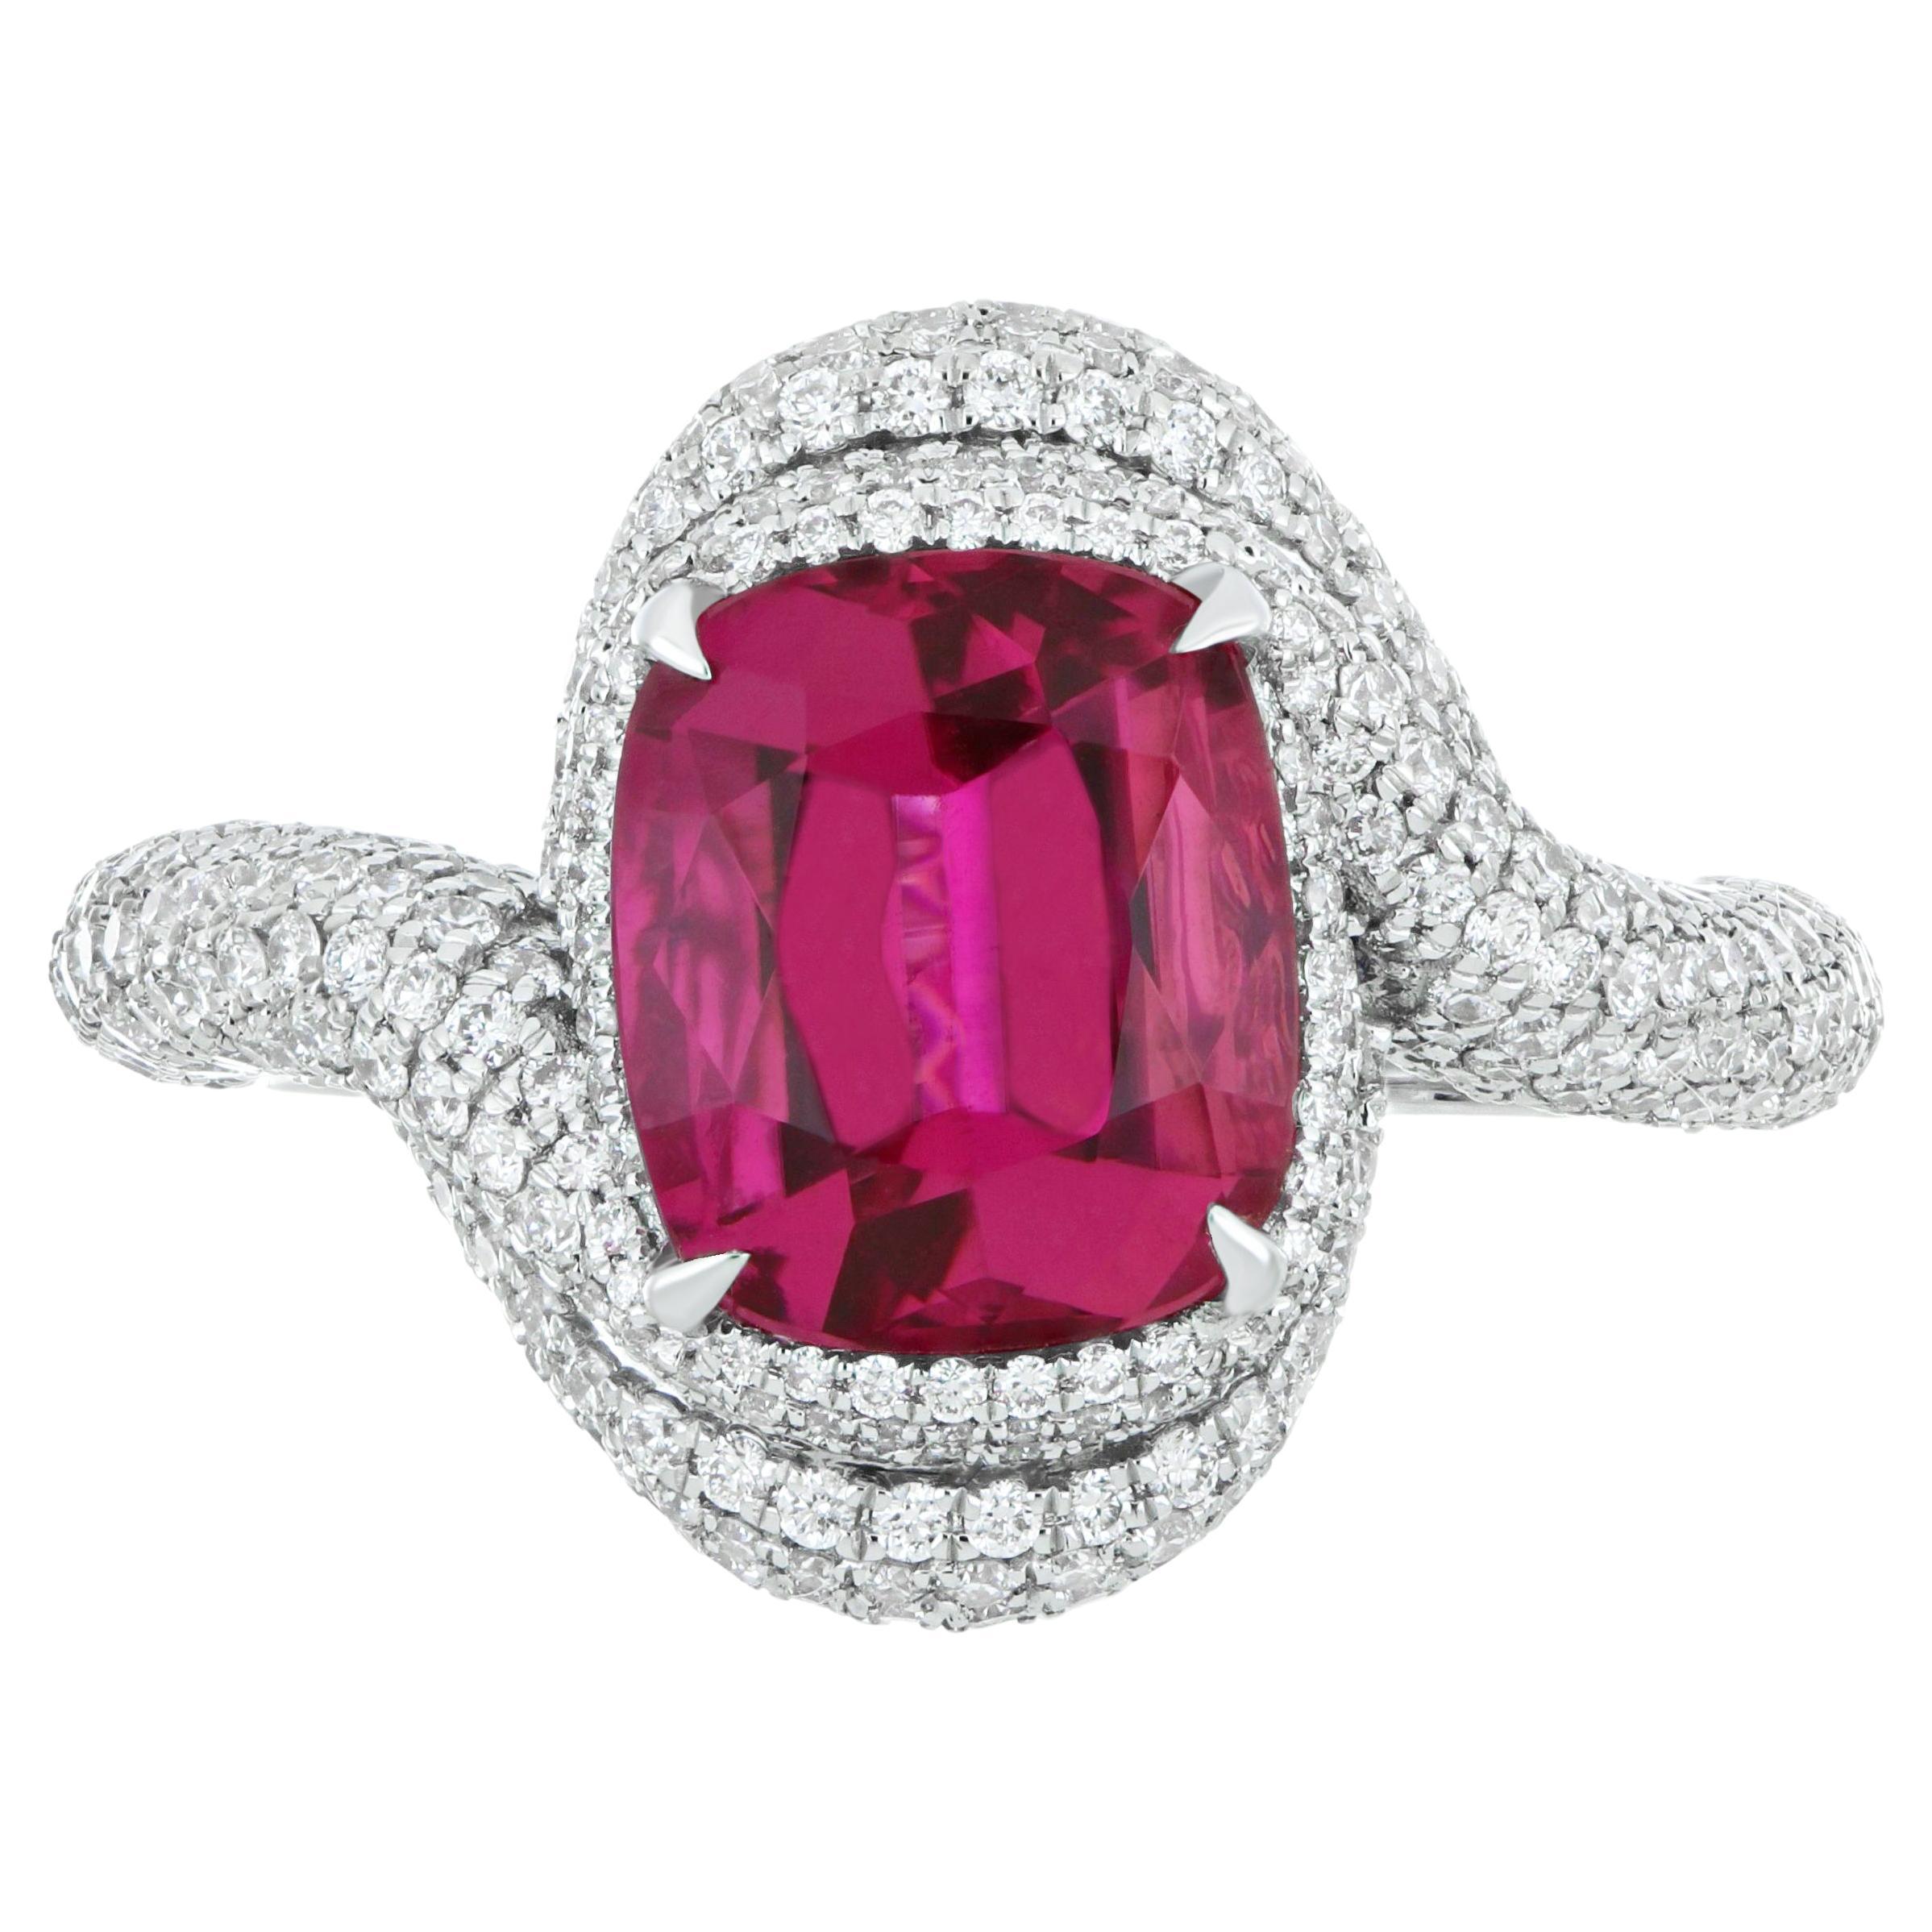 4.05 Carats Rubellite and Diamond Studded Ring in 18K White Gold Ring For Sale